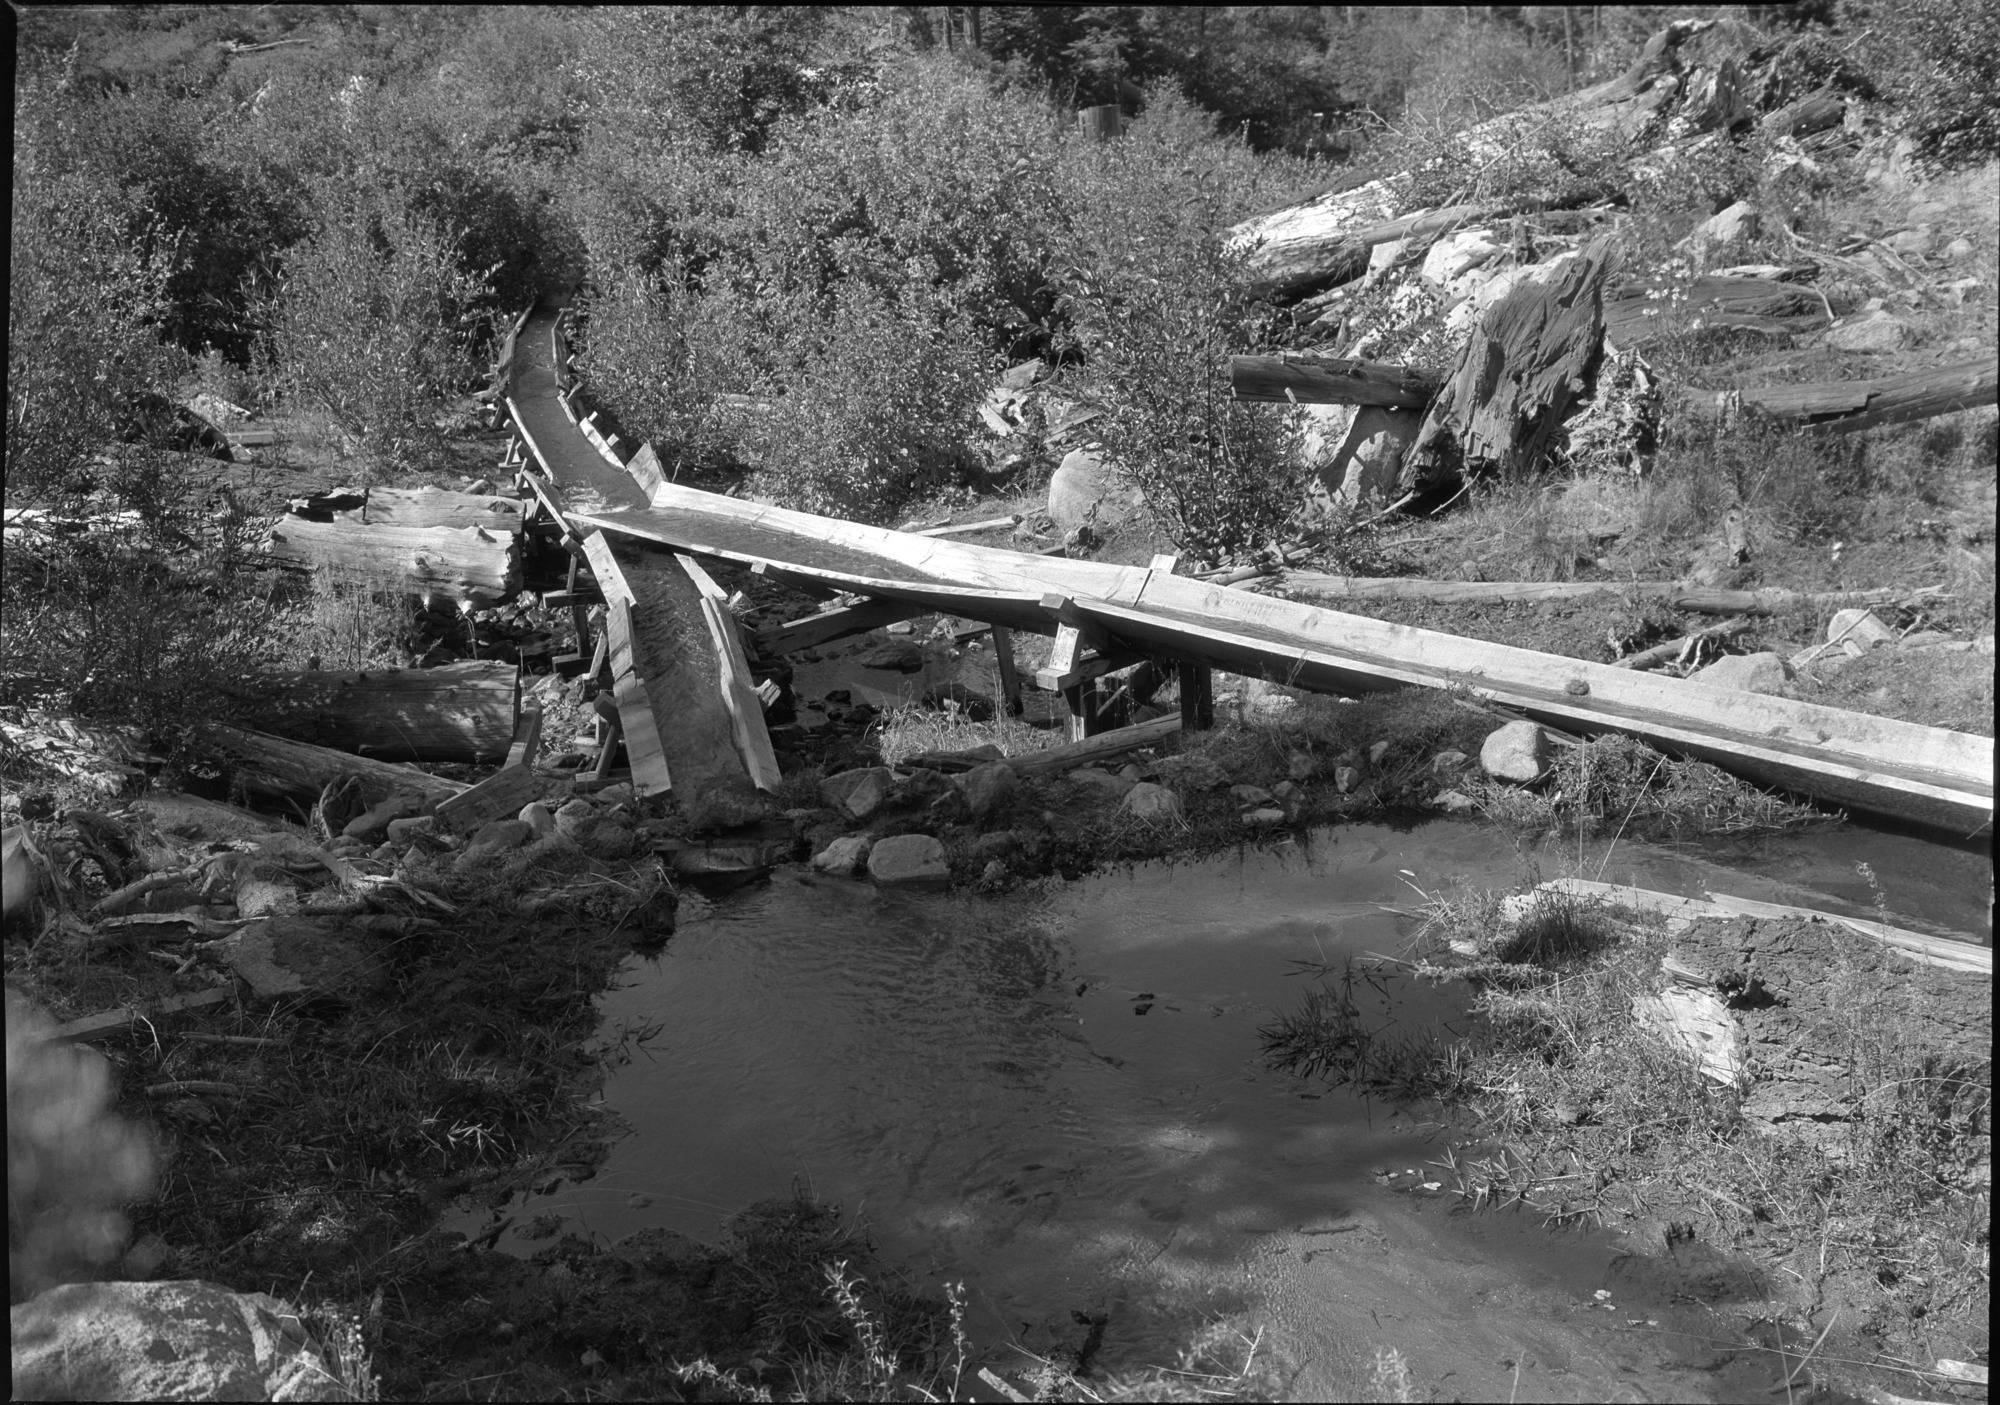 Sugar Pine Flume showing intake & dirt dam. Note leaky old flume.